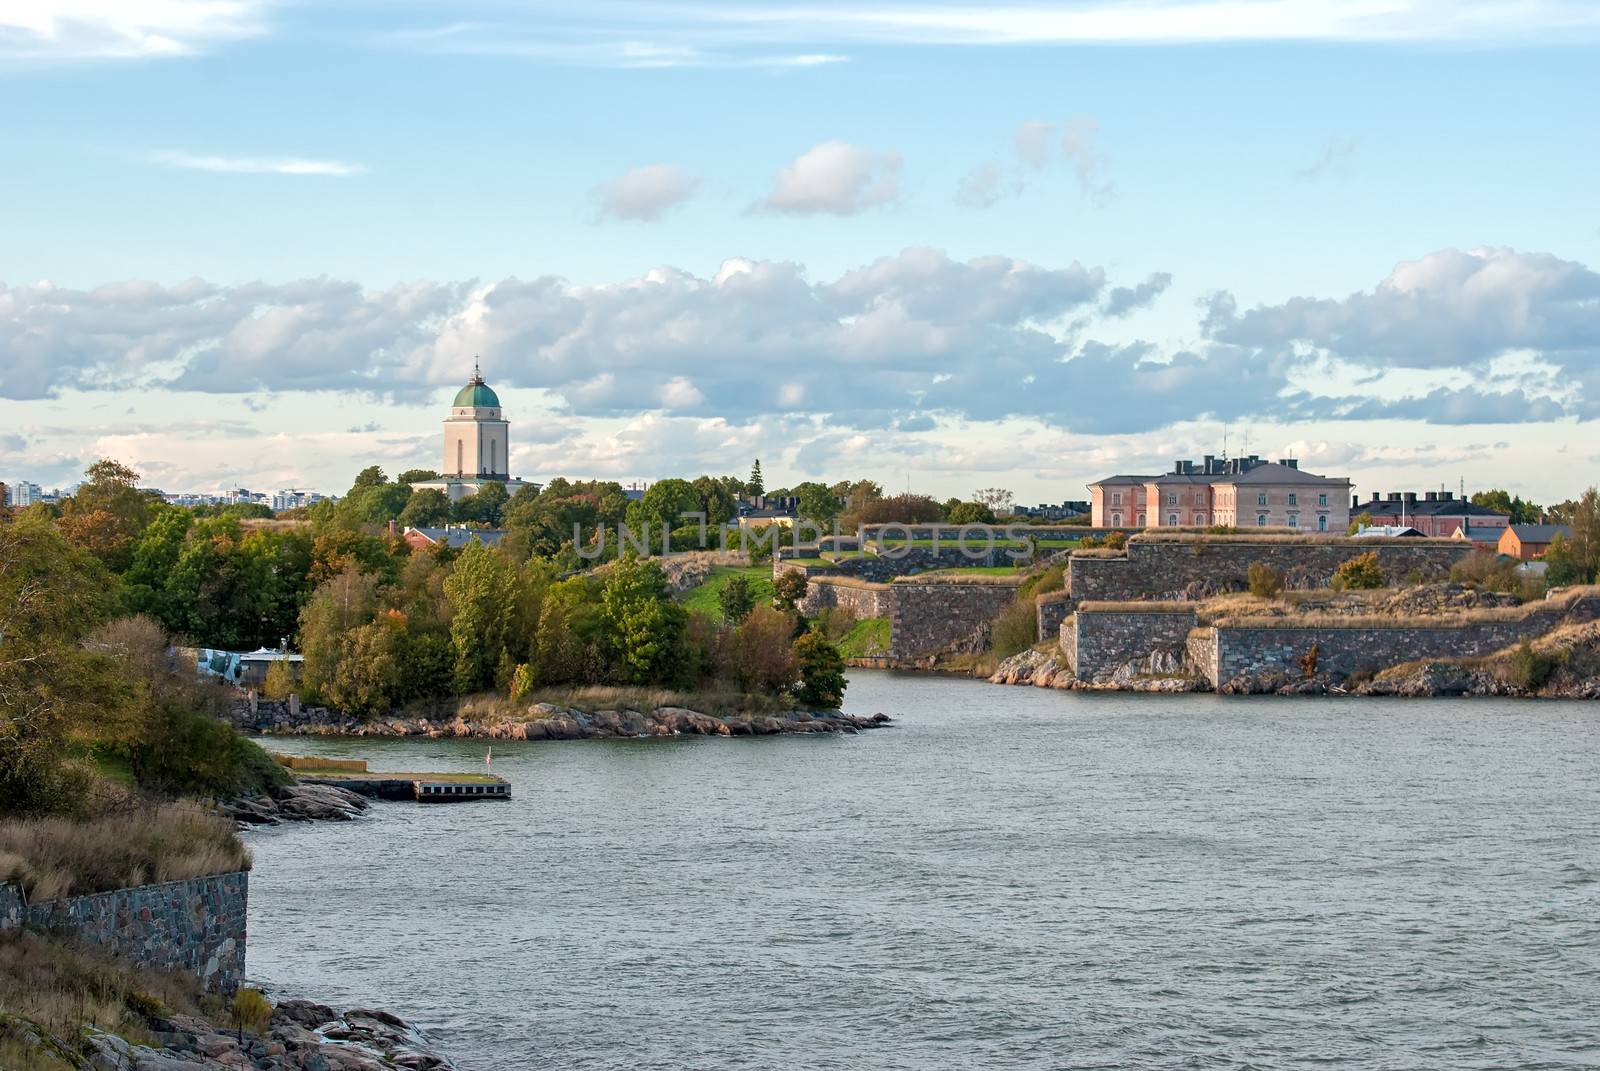 Fortress of Suomenlinna. Helsinki. Finland. by maisicon